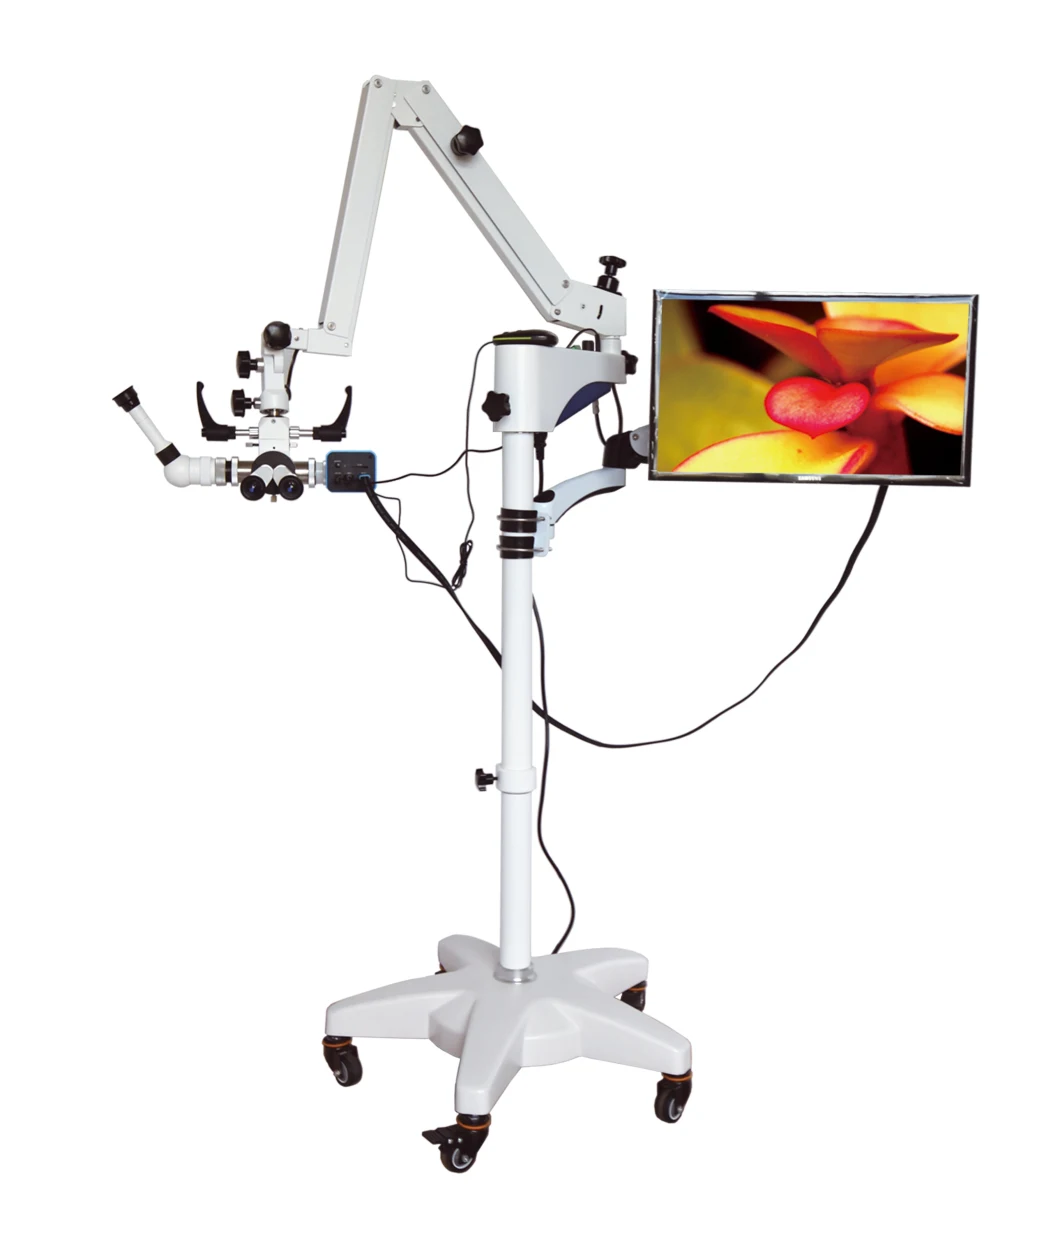 China Factory Surgical Multipurpose Hospital Operating Operation Microscope for Ent